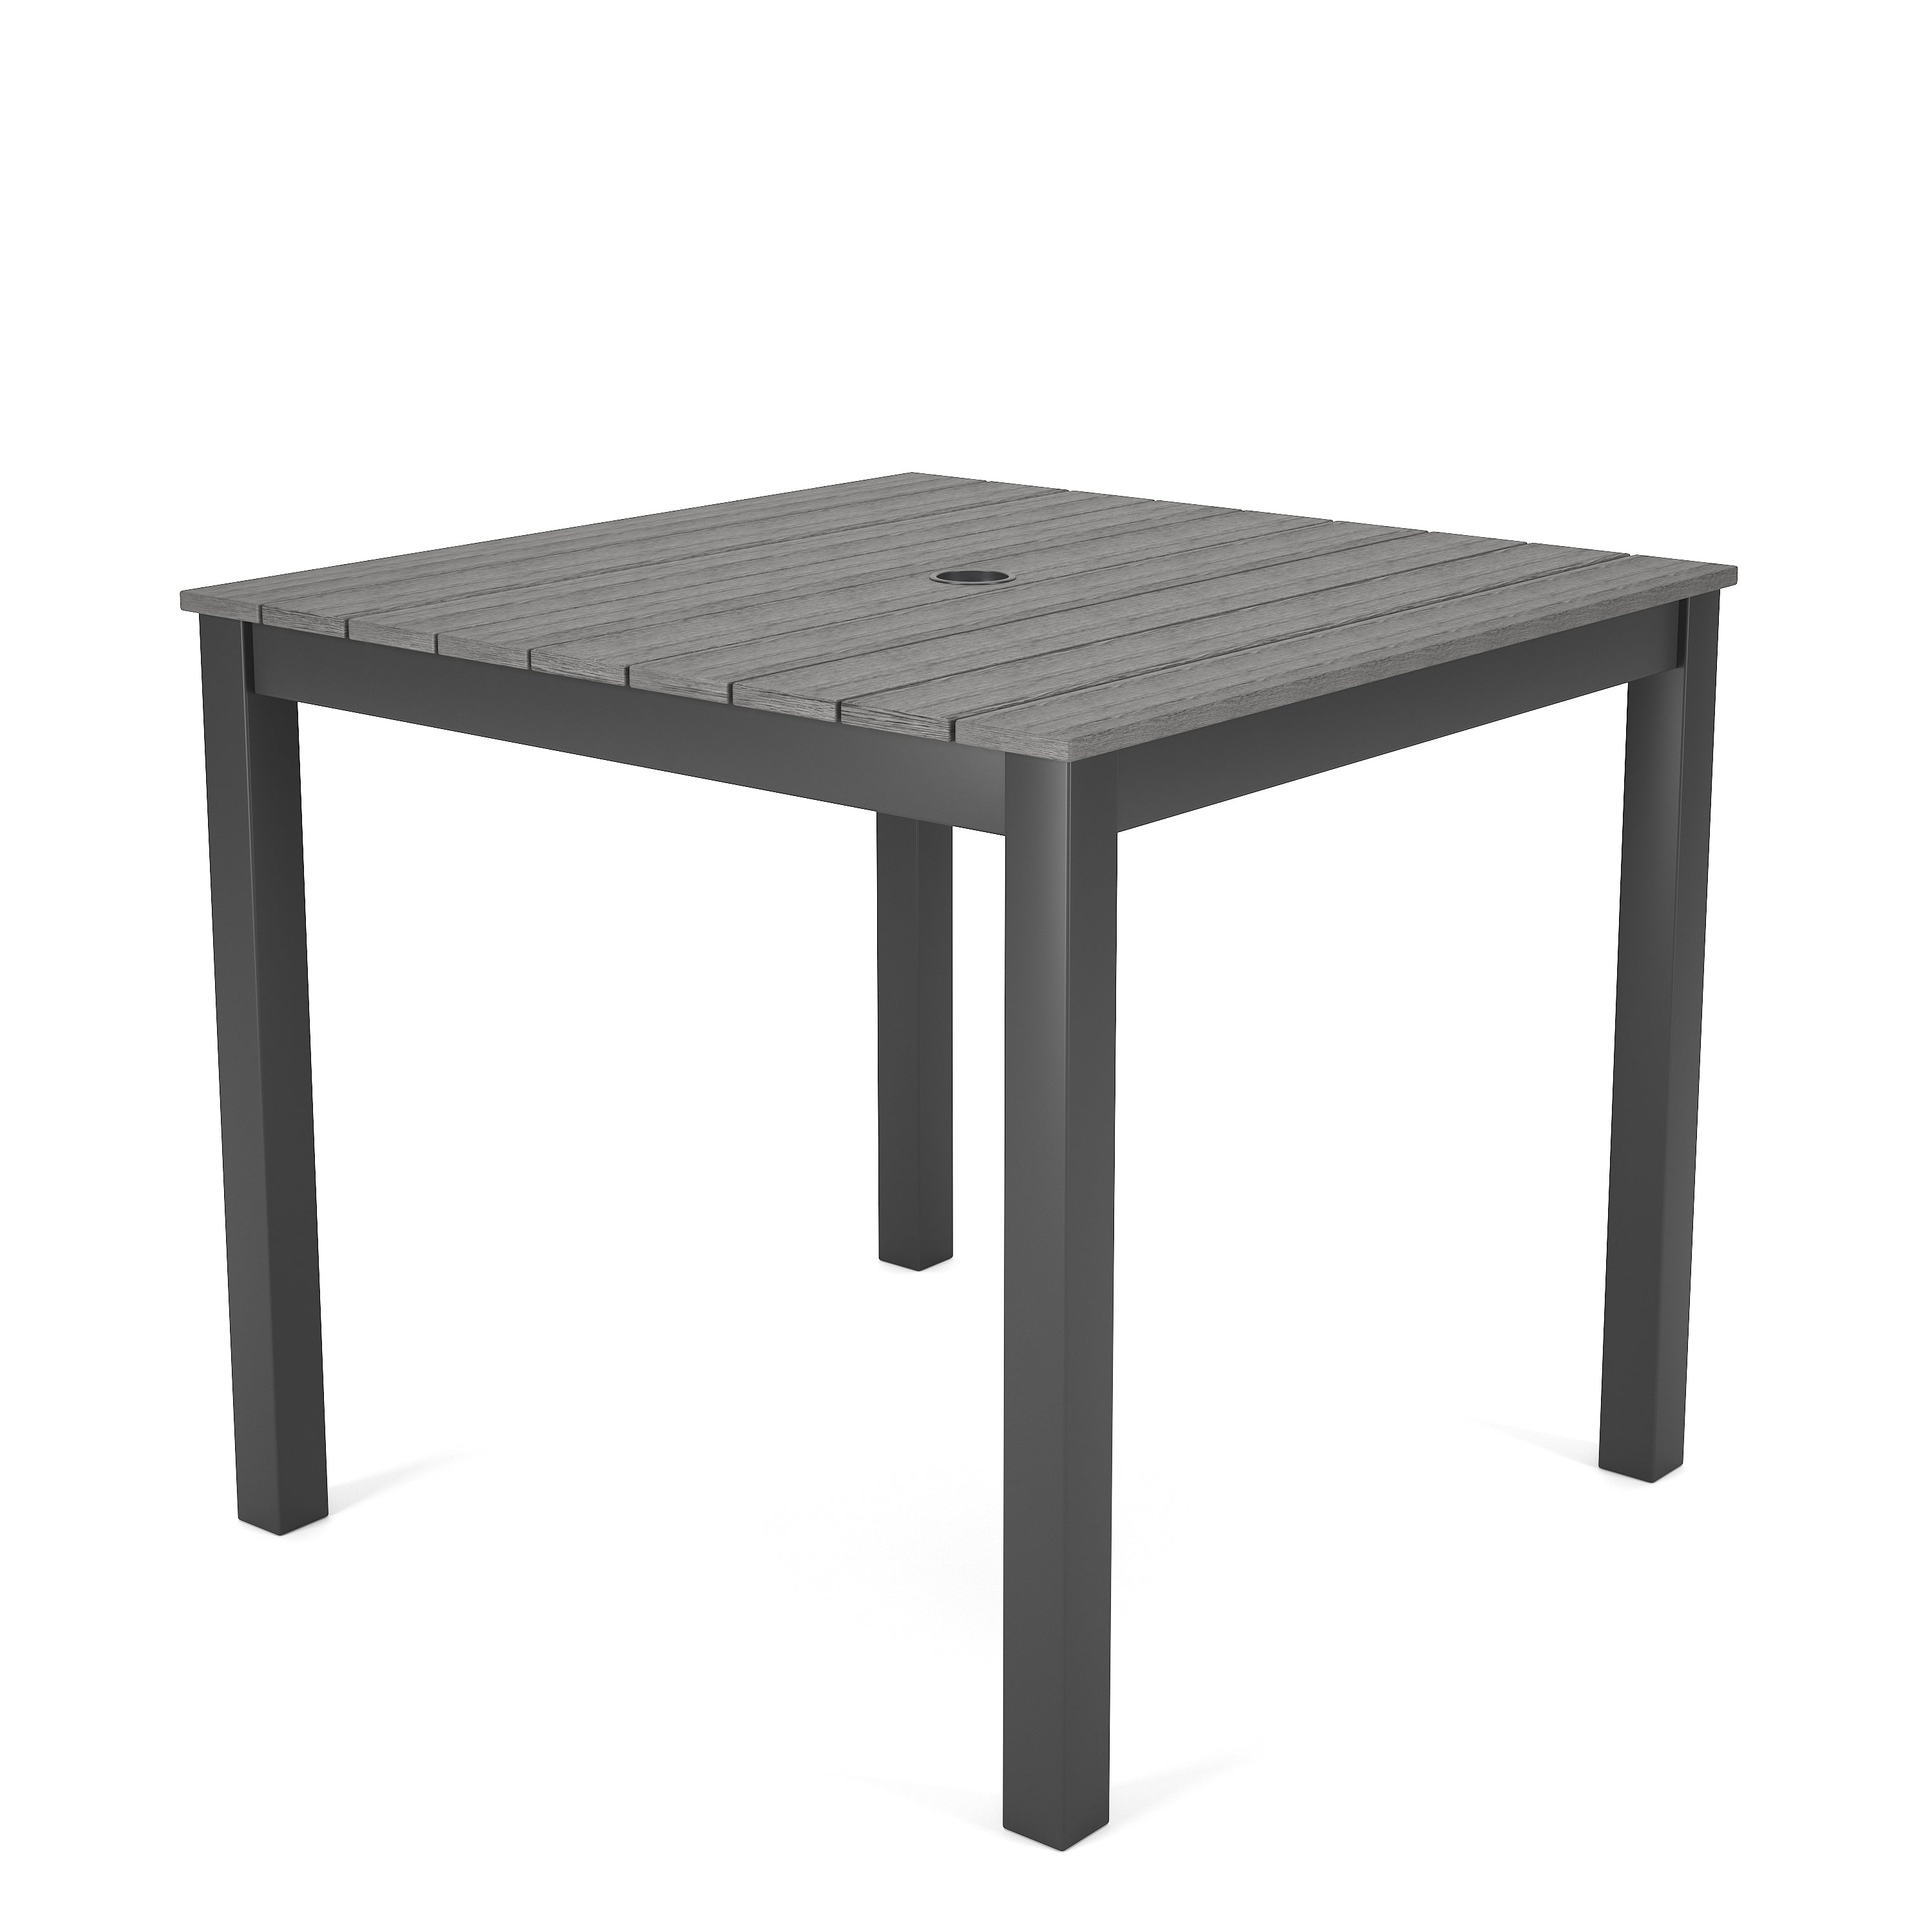 Forever Patio Chalfonte 33″ Square Dining Table with Umbrella Hole by NorthCape International